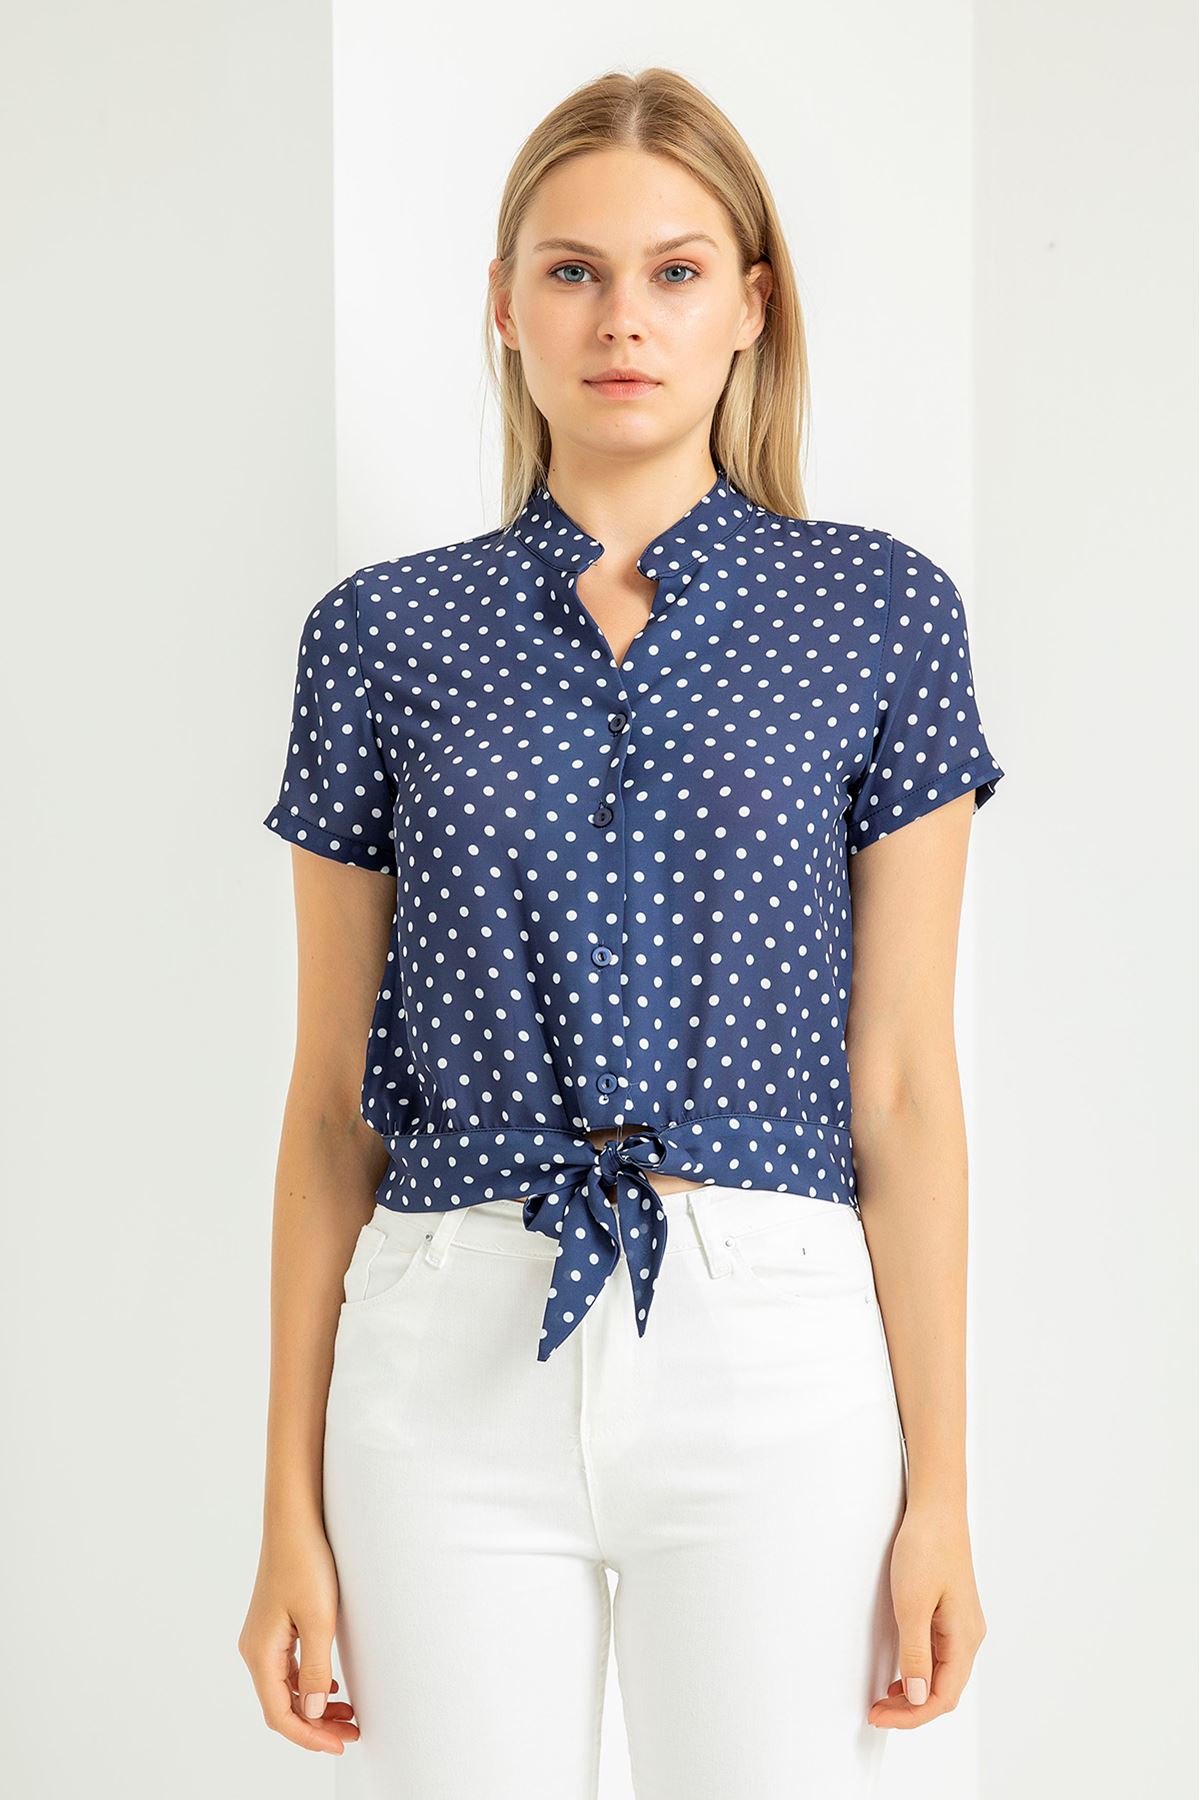 Jessica Blouse Long Sleeve Shirt Collar Dotted Print Blouse - Navy Blue 